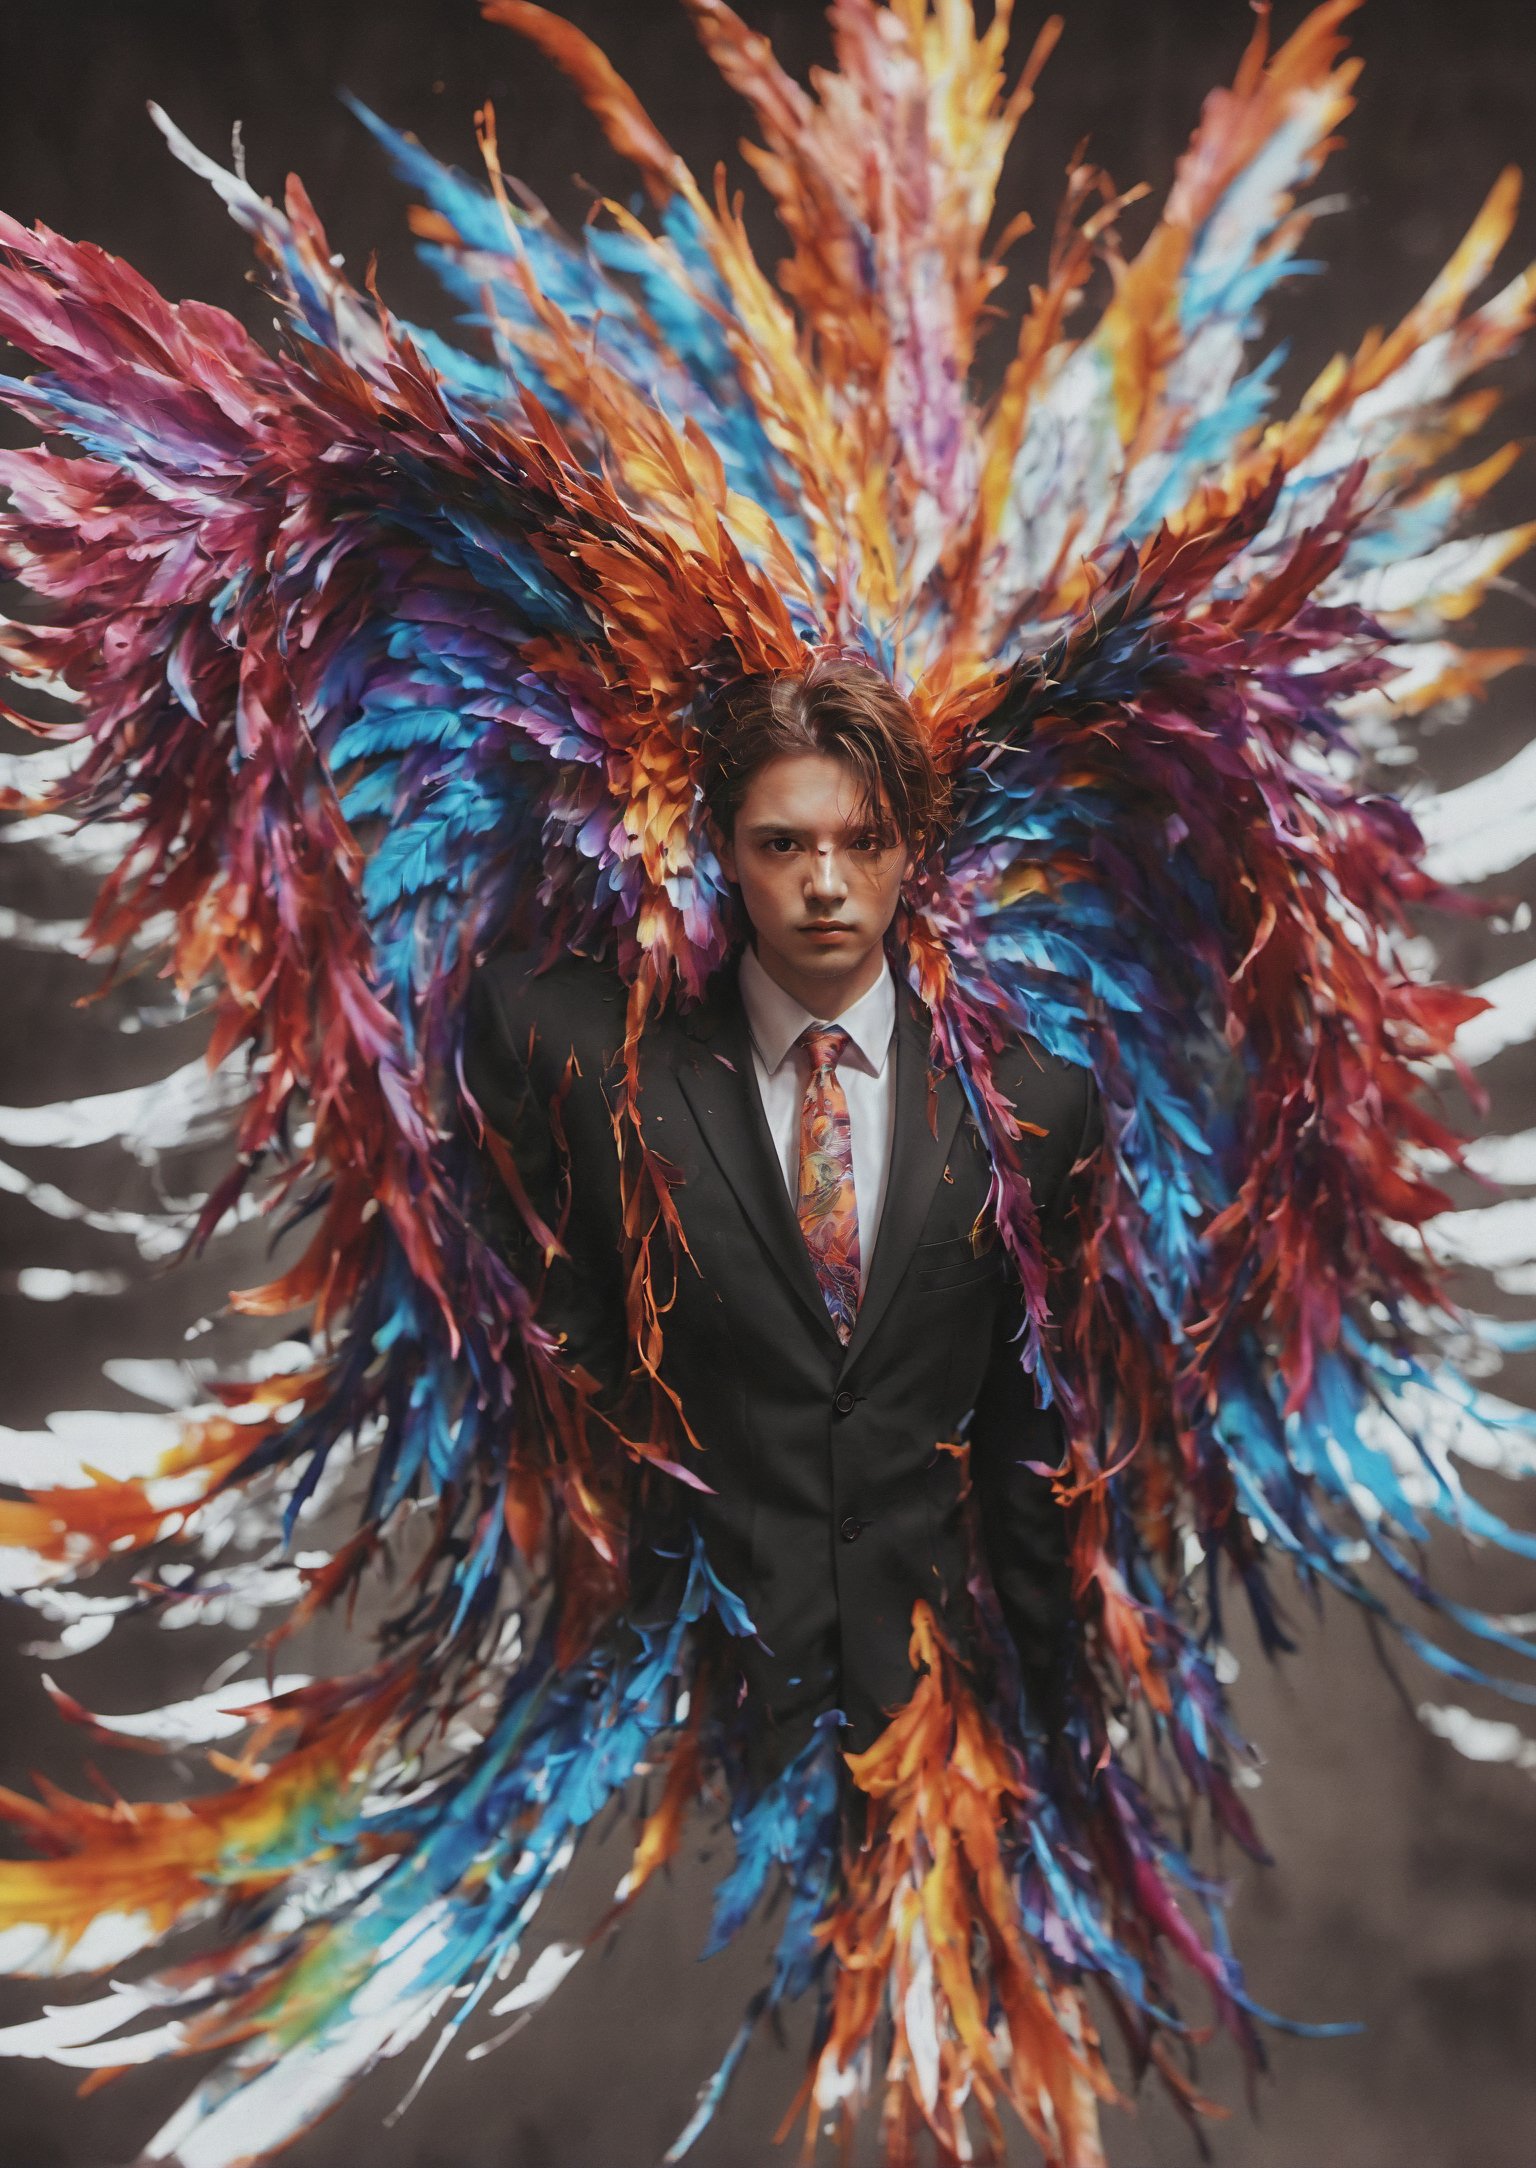 Create an image of a young man wearing a suit, featuring vibrant, dark  wings extending from his back. Random movement The background should be plain white, emphasizing the contrast and detailing of the beauty wings and the sharpness of the suit. The man should appear poised and elegant, with the wings unfurled to showcase a spectrum of vivid hues, blending seamlessly from one color to another. The focus should be on the meticulous details of the wings’ feathers and the suit’s fabric, capturing a harmonious blend of natural and refined elements, wings,Stylish, close up,l3min,xxmixgirl,fire element,wings